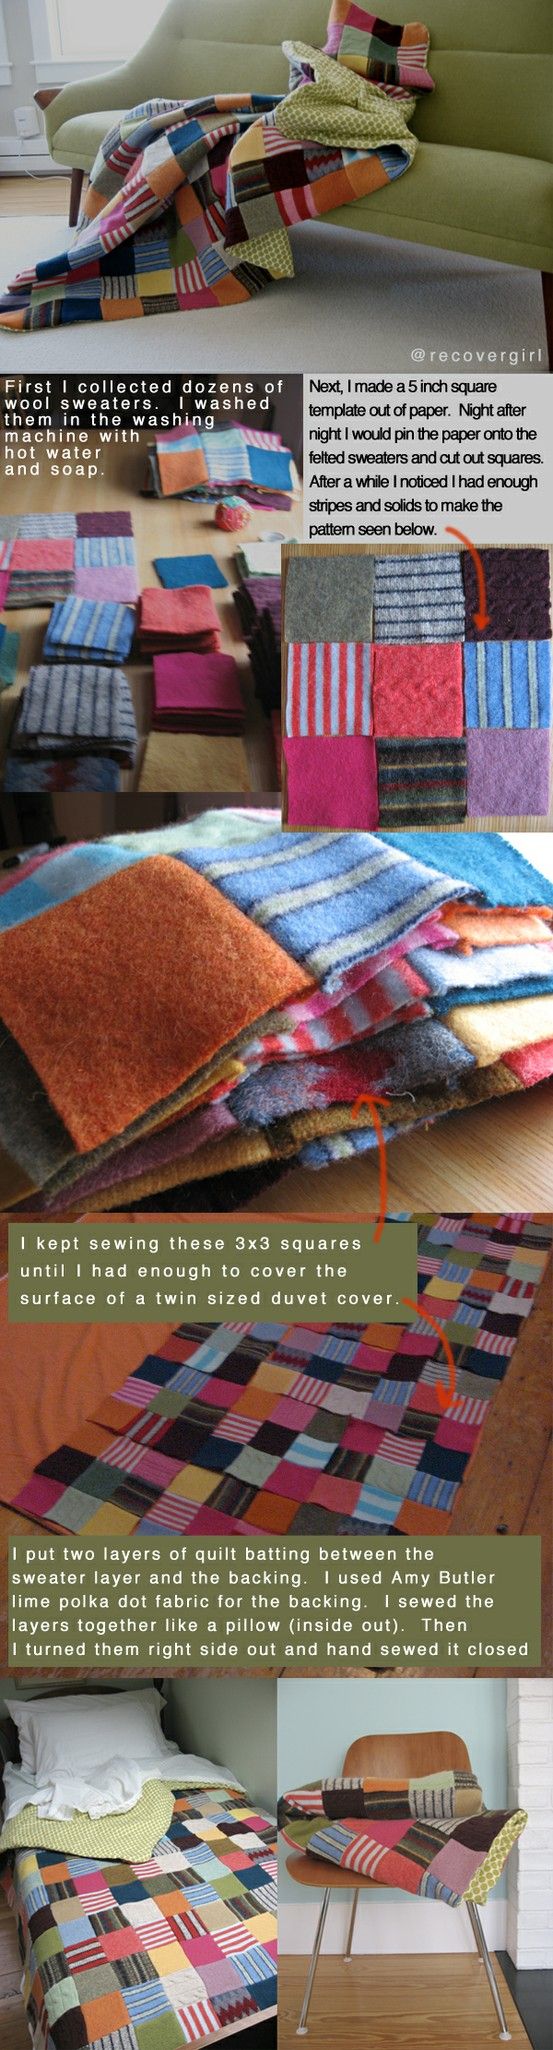 Quilt made out of old wool sweaters!  Gorgeous!